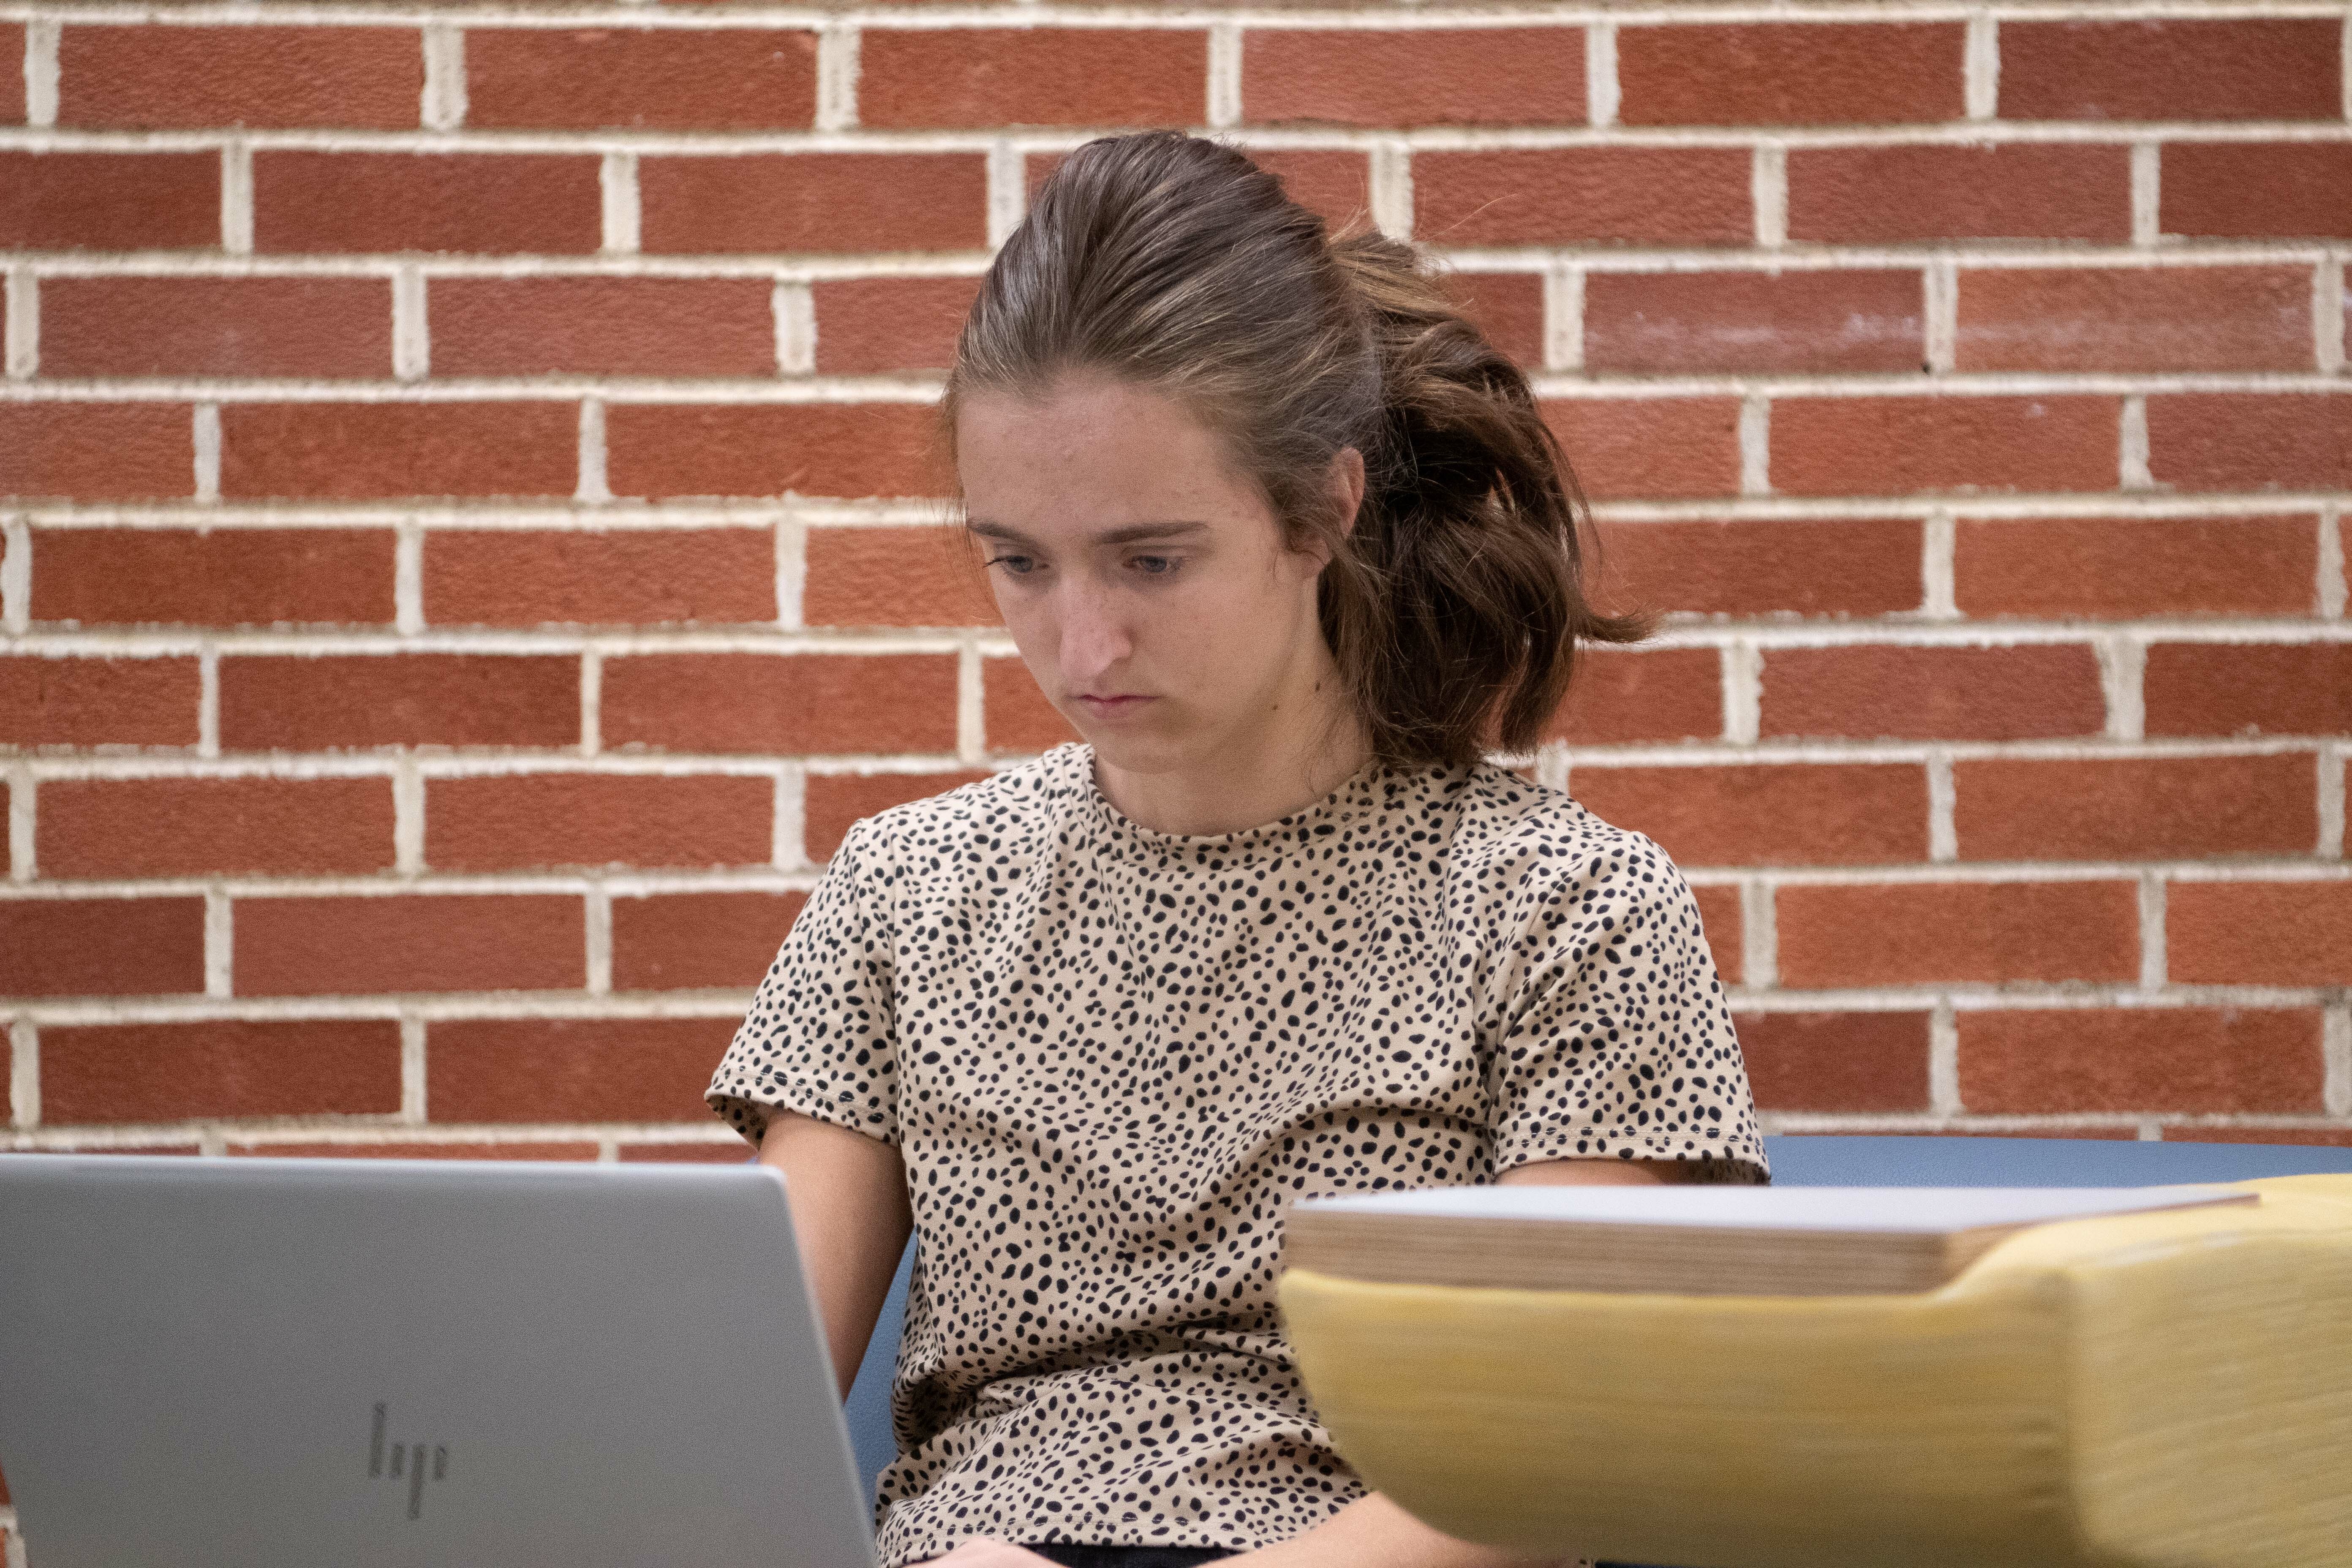 Female student works on computer